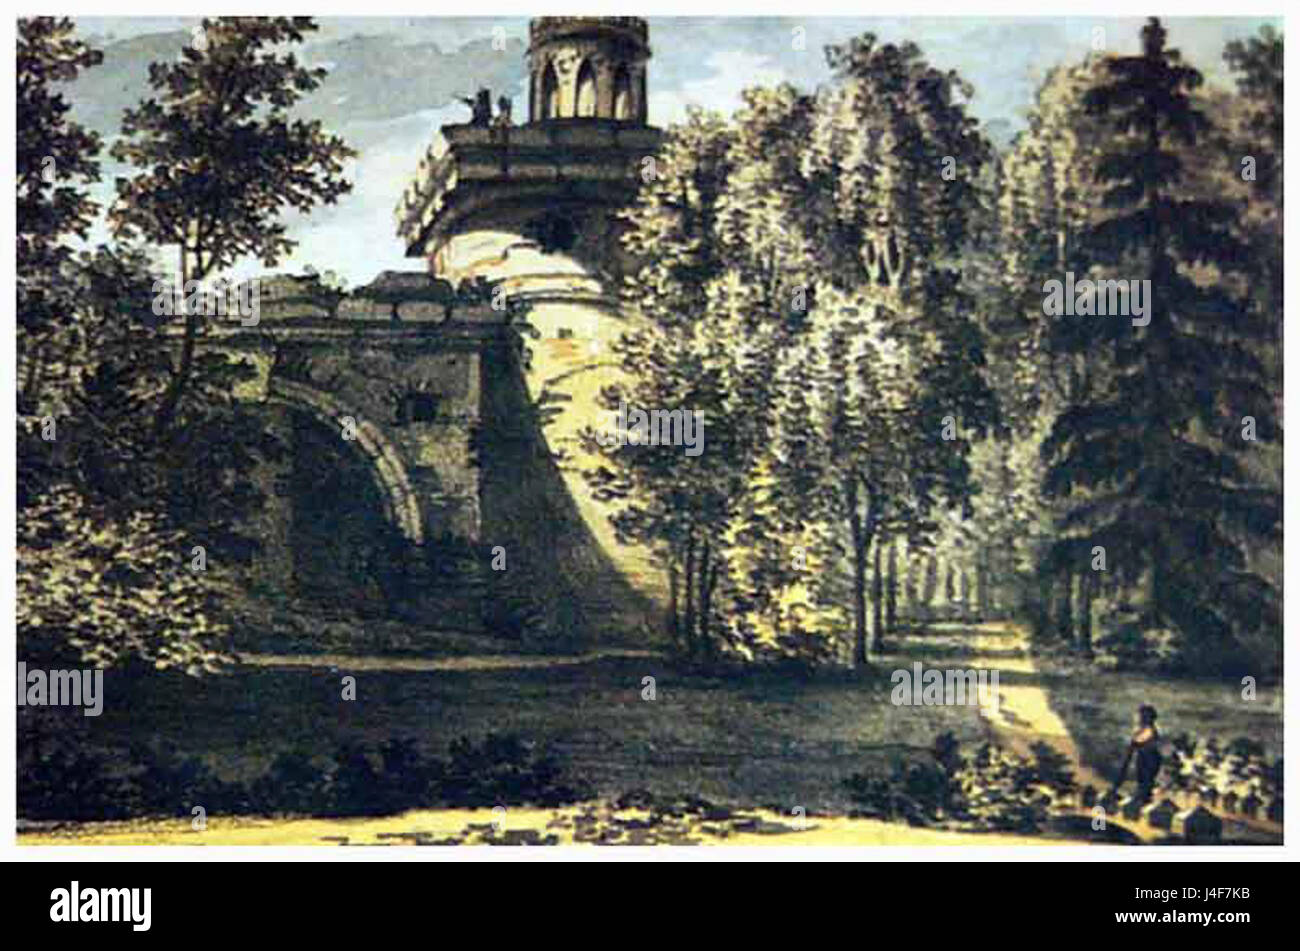 Ruin tower in 1820s Stock Photo